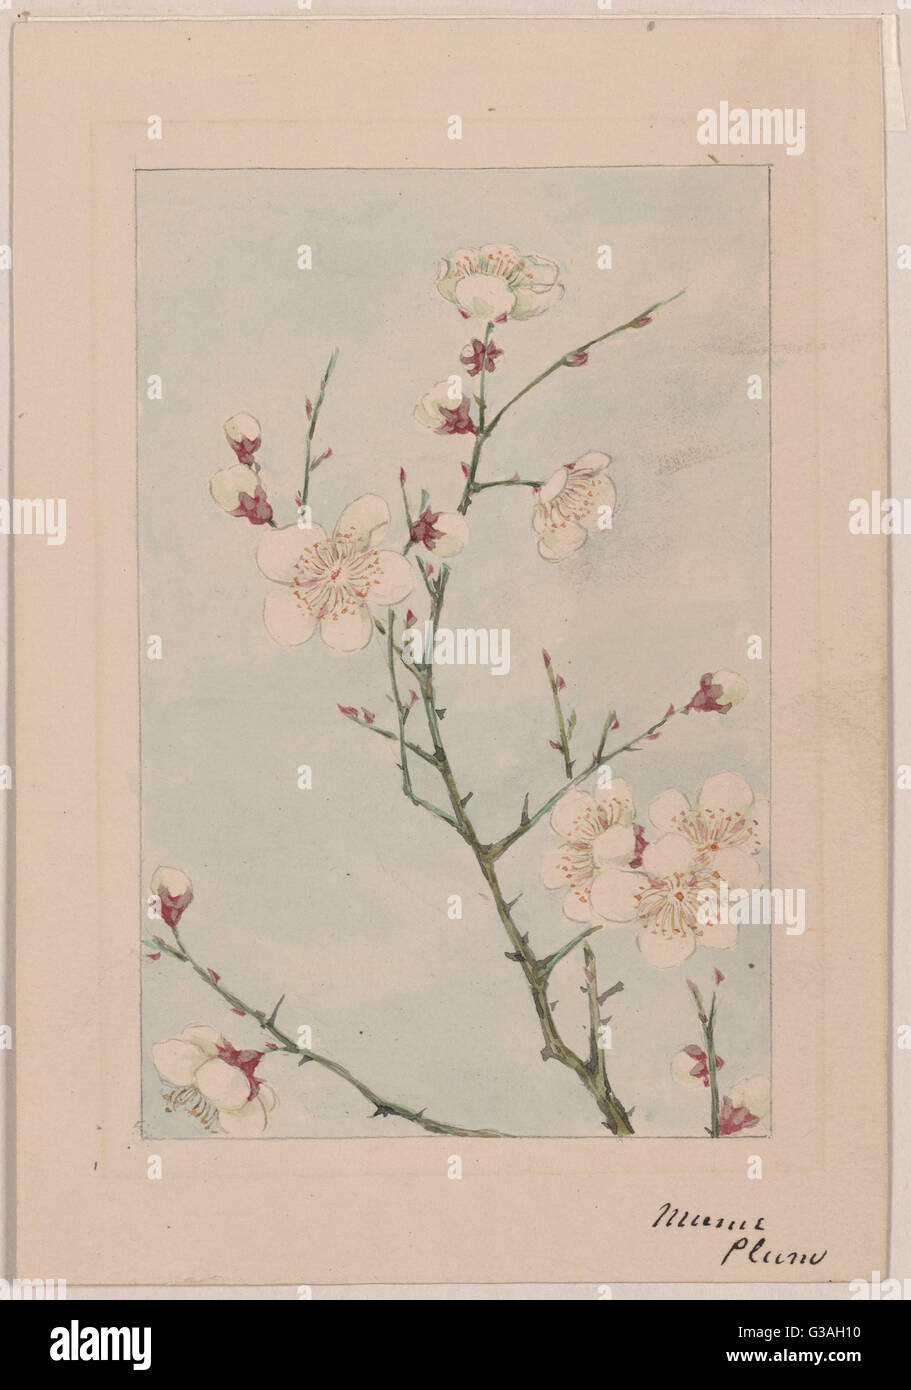 Plum branches with blossoms Stock Photo